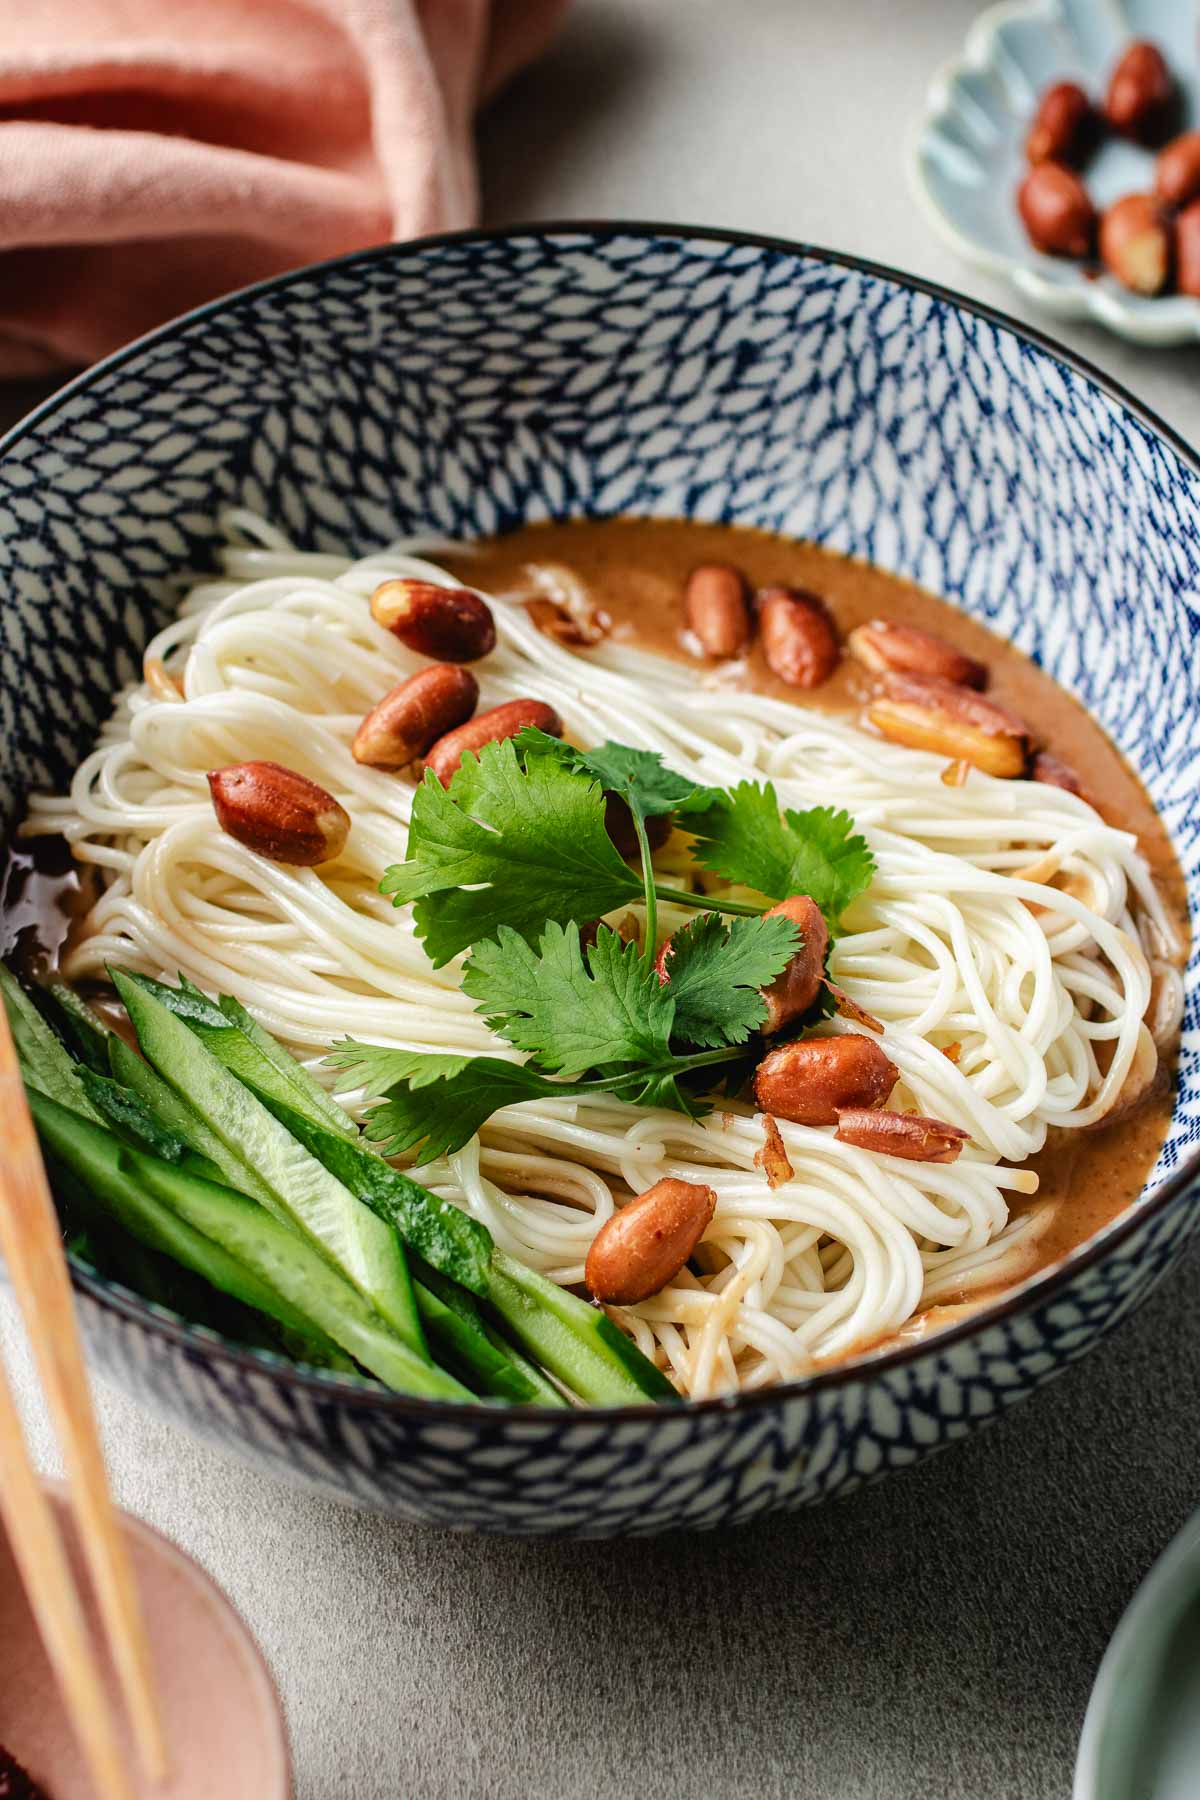 A side image shows beautiful boiled and chilled cold noodles served in an Asian blue white color noodle bowl with peanut sauce at the bottom and veggies on the side.